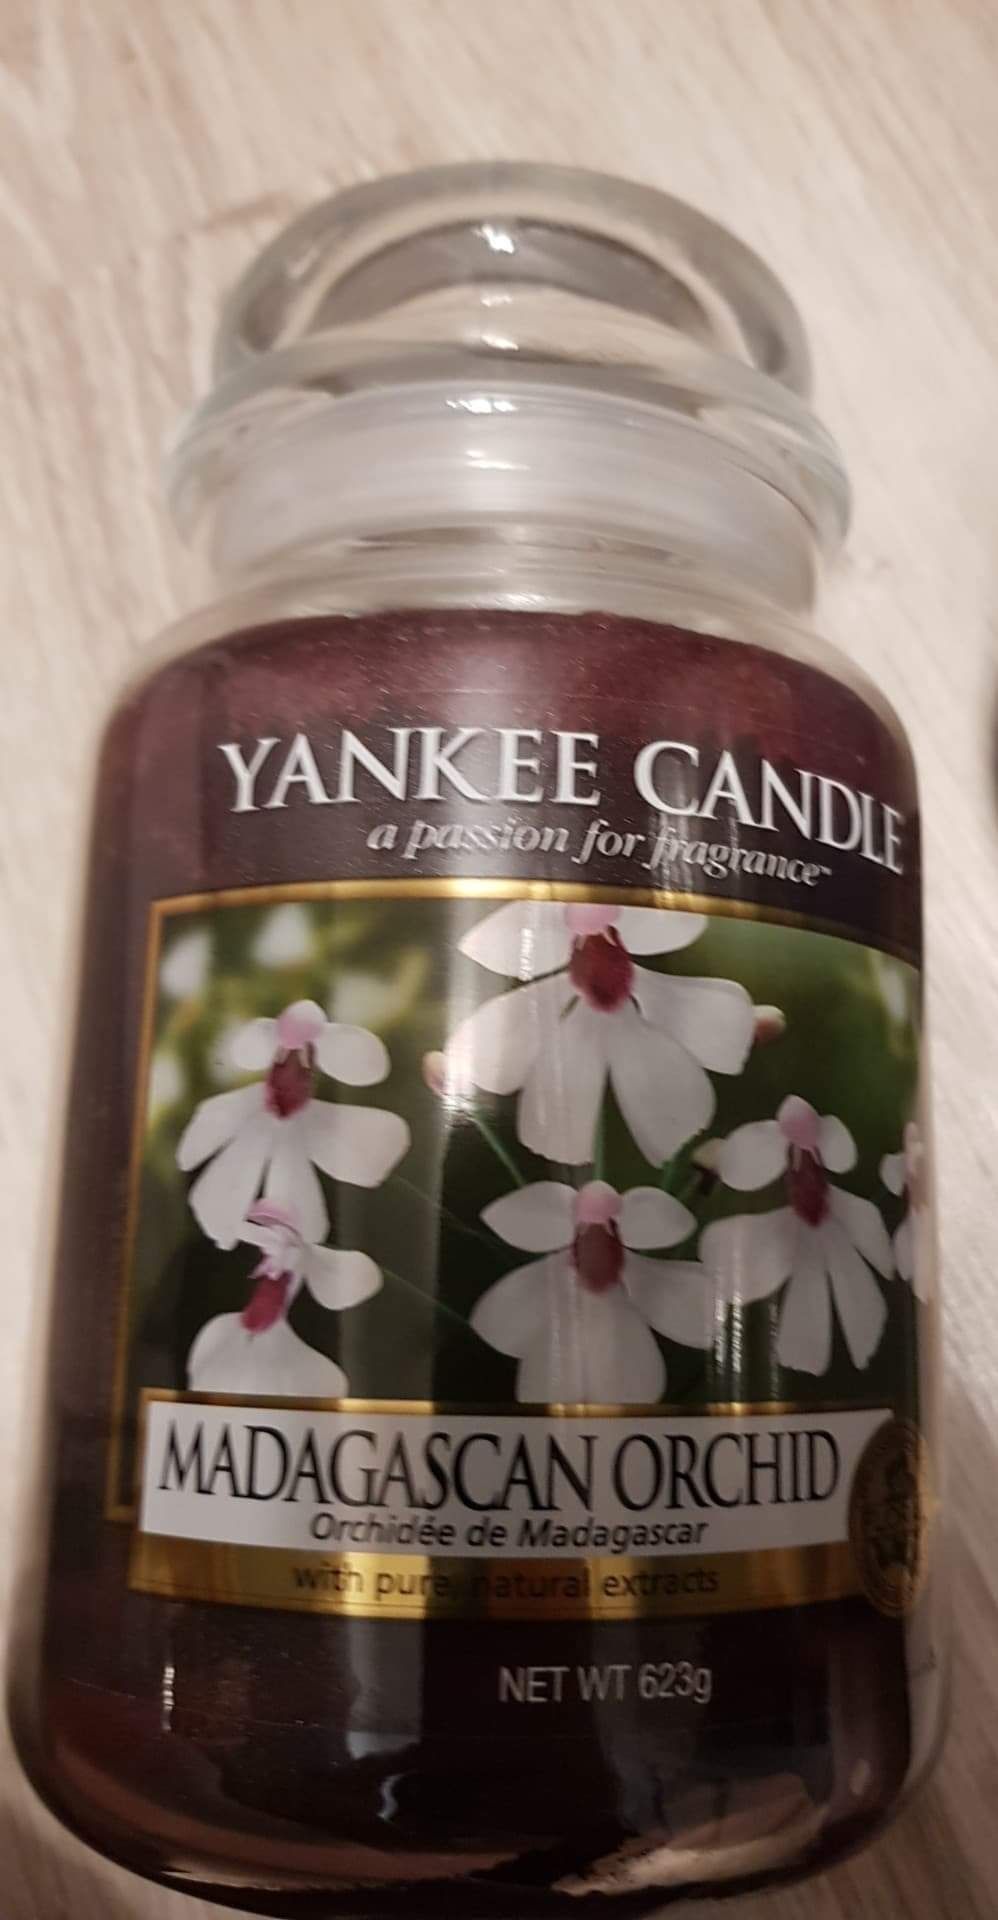 Madagascan Orchid,  Yankee Candle